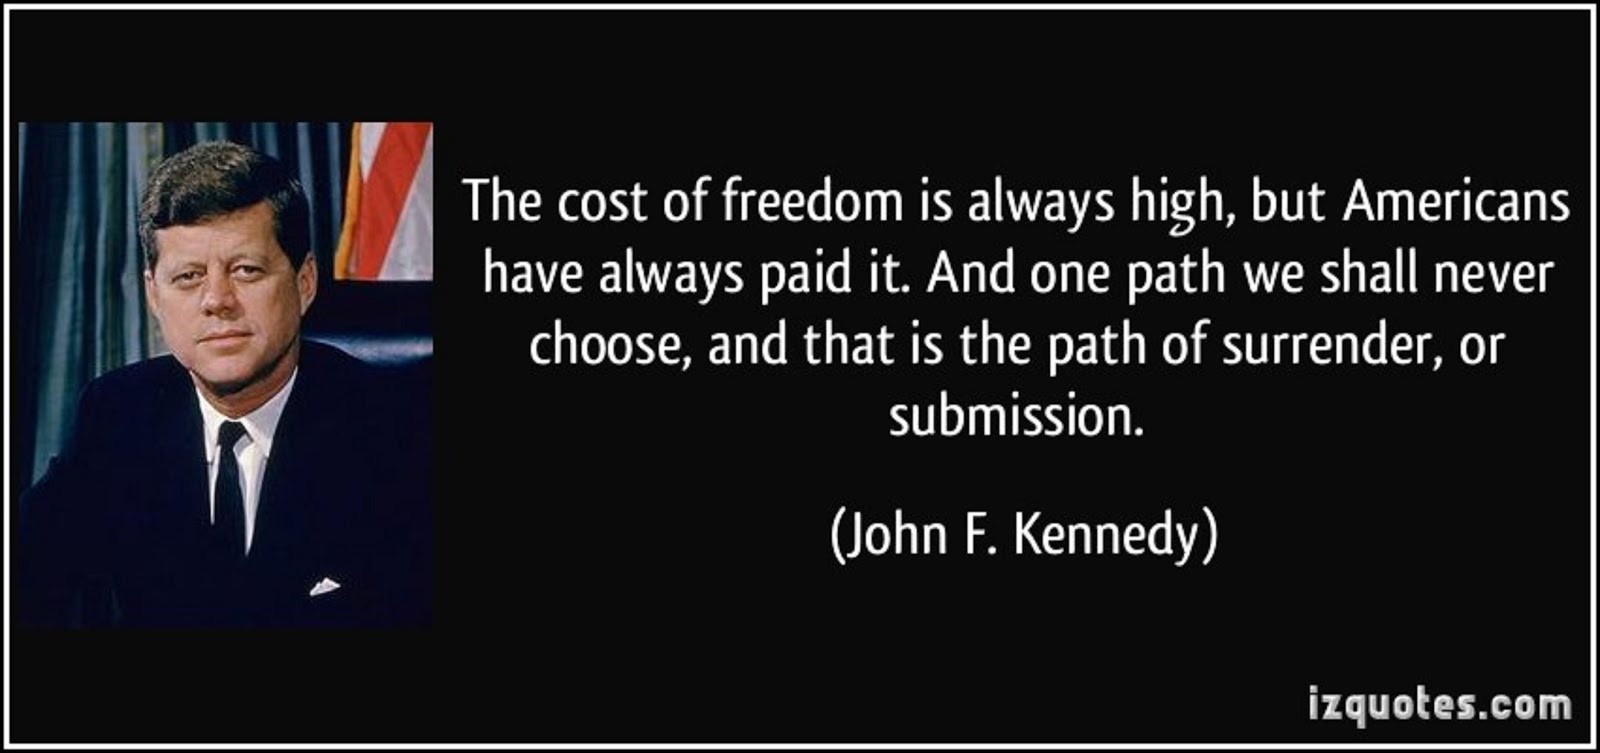 THE COST OF FREEDOM BY JFK